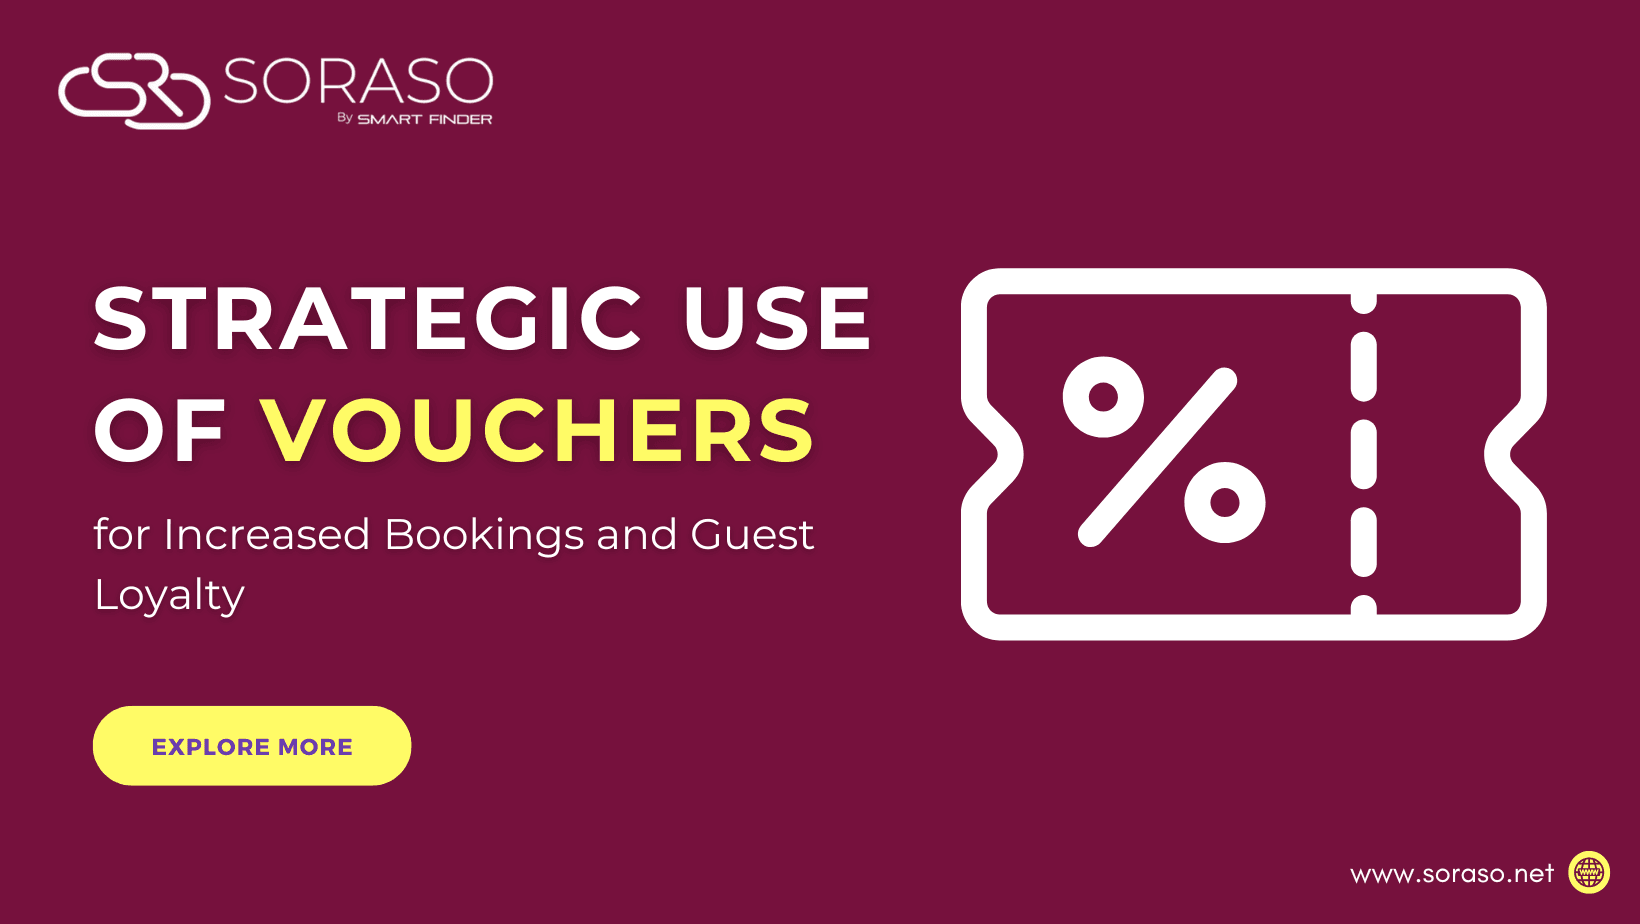 Strategic Use of Vouchers for Increased Bookings and Guest Loyalty